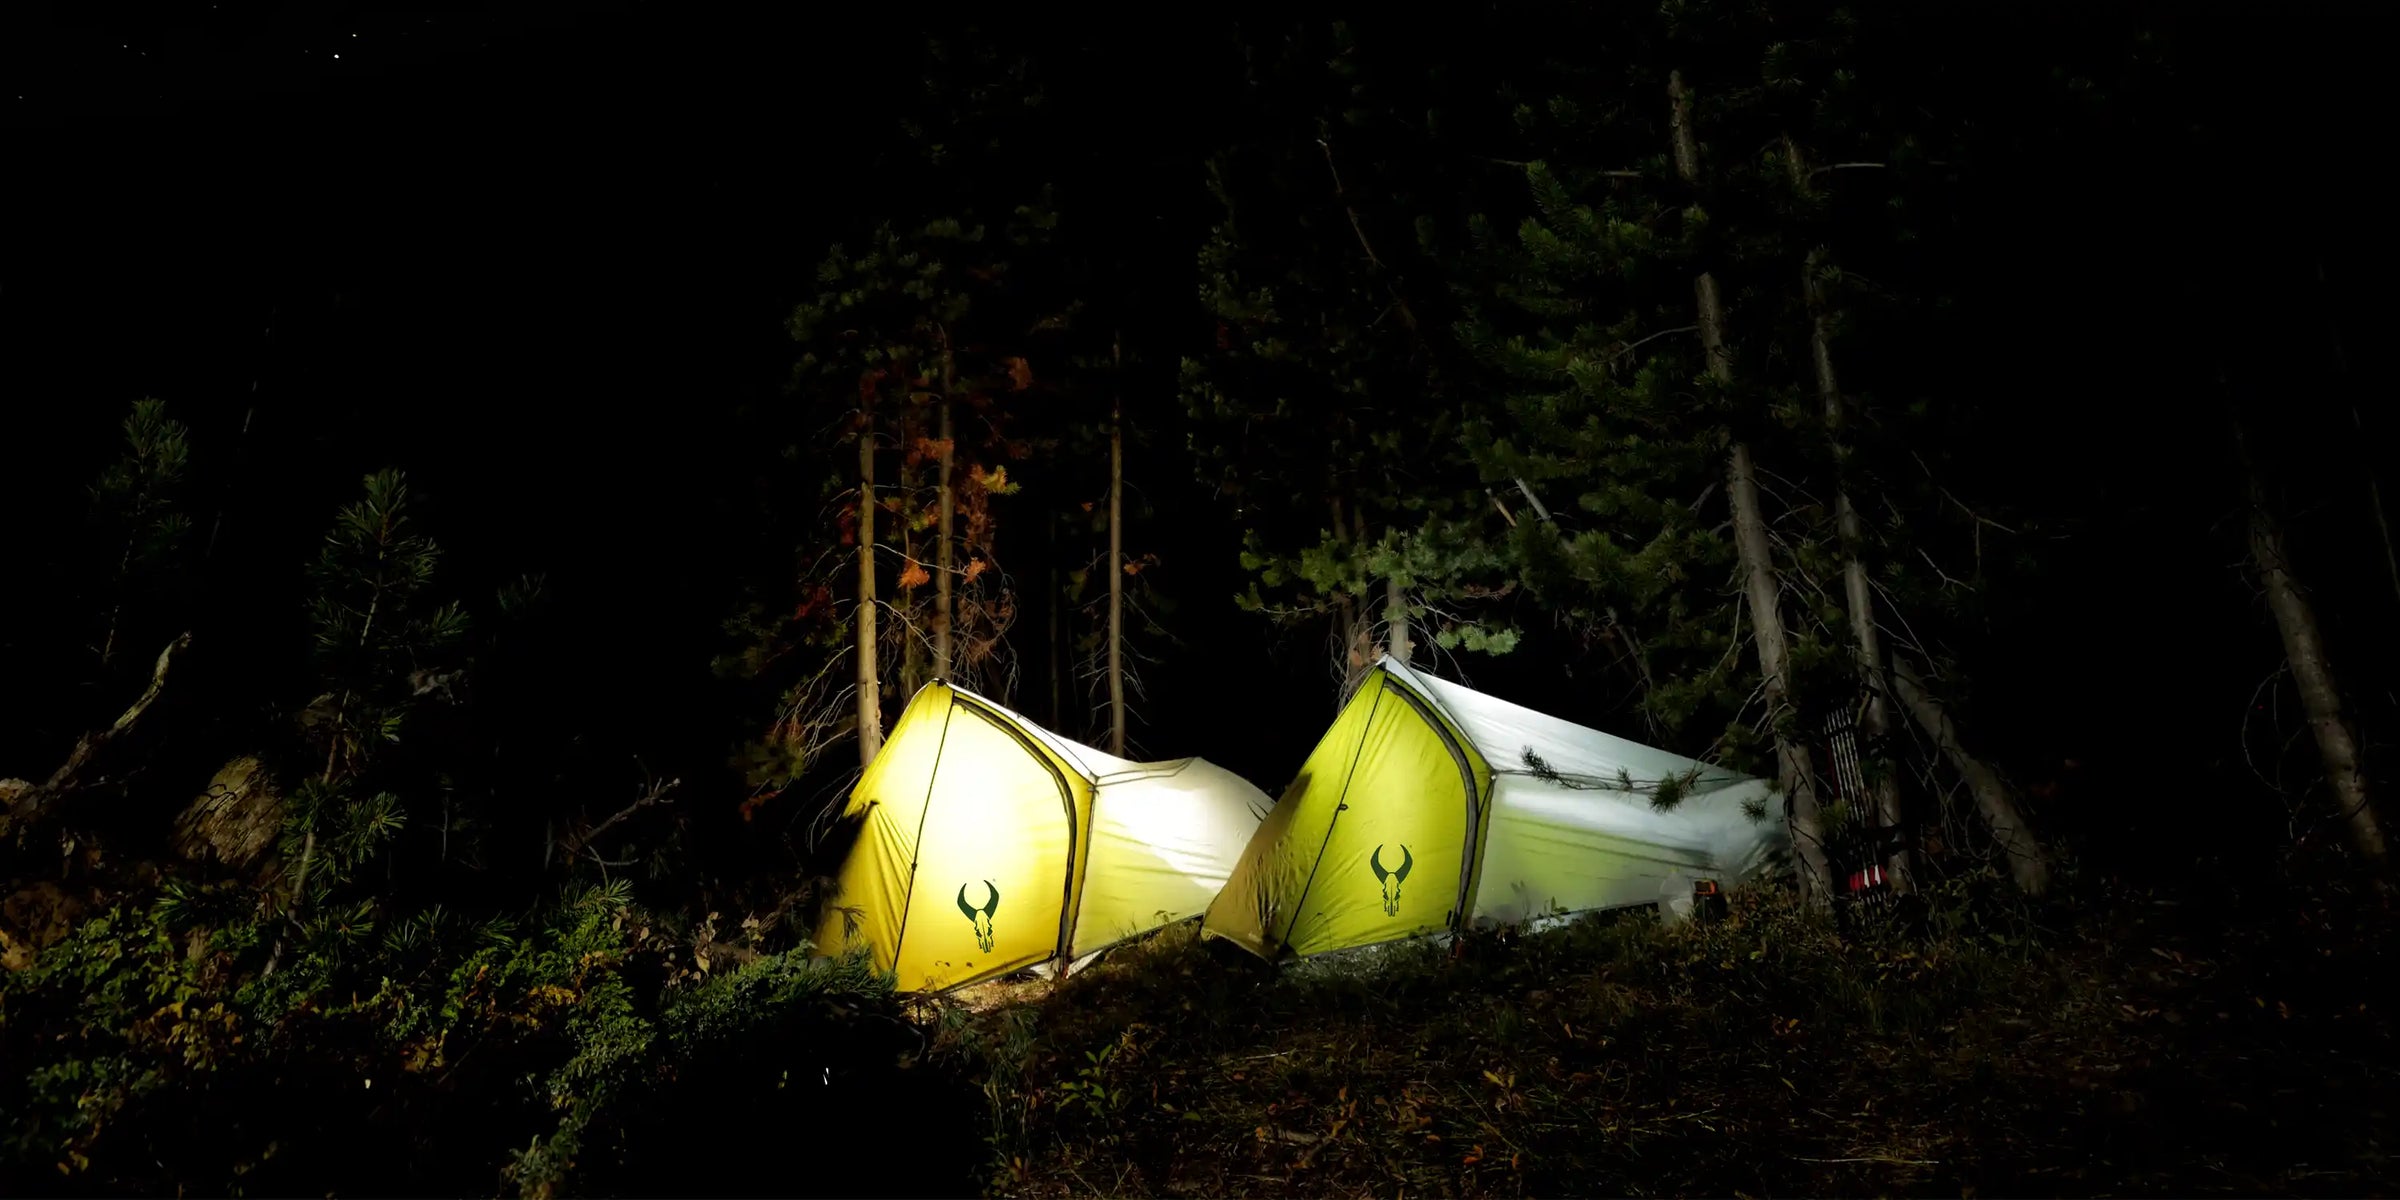 two Badlands tent in a forest at night